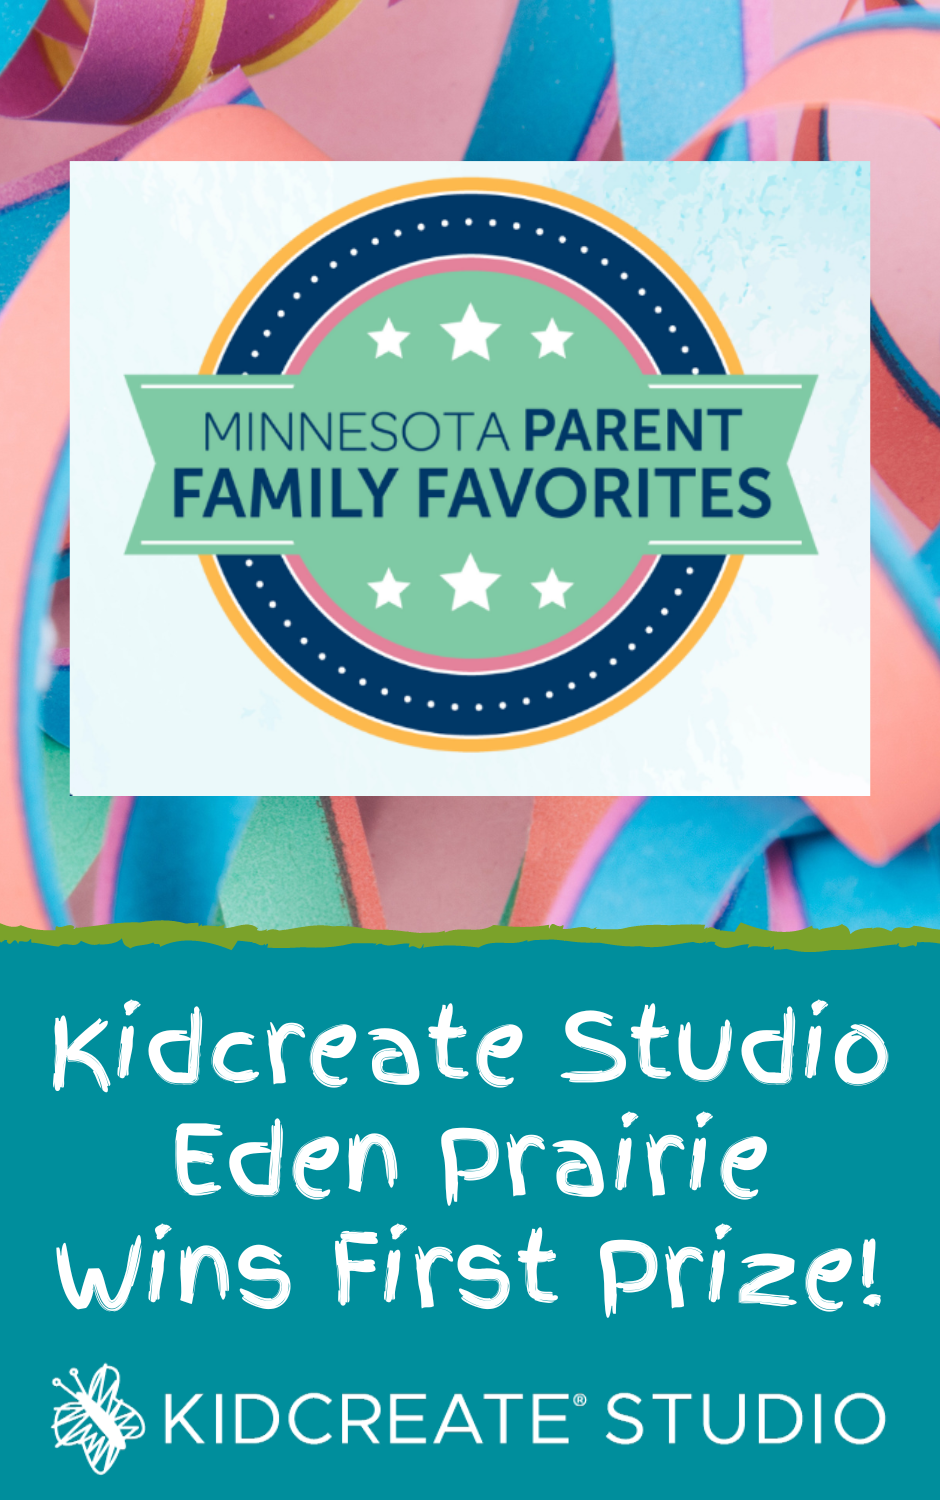 Minnesota Parents Share Their Family Favorites!